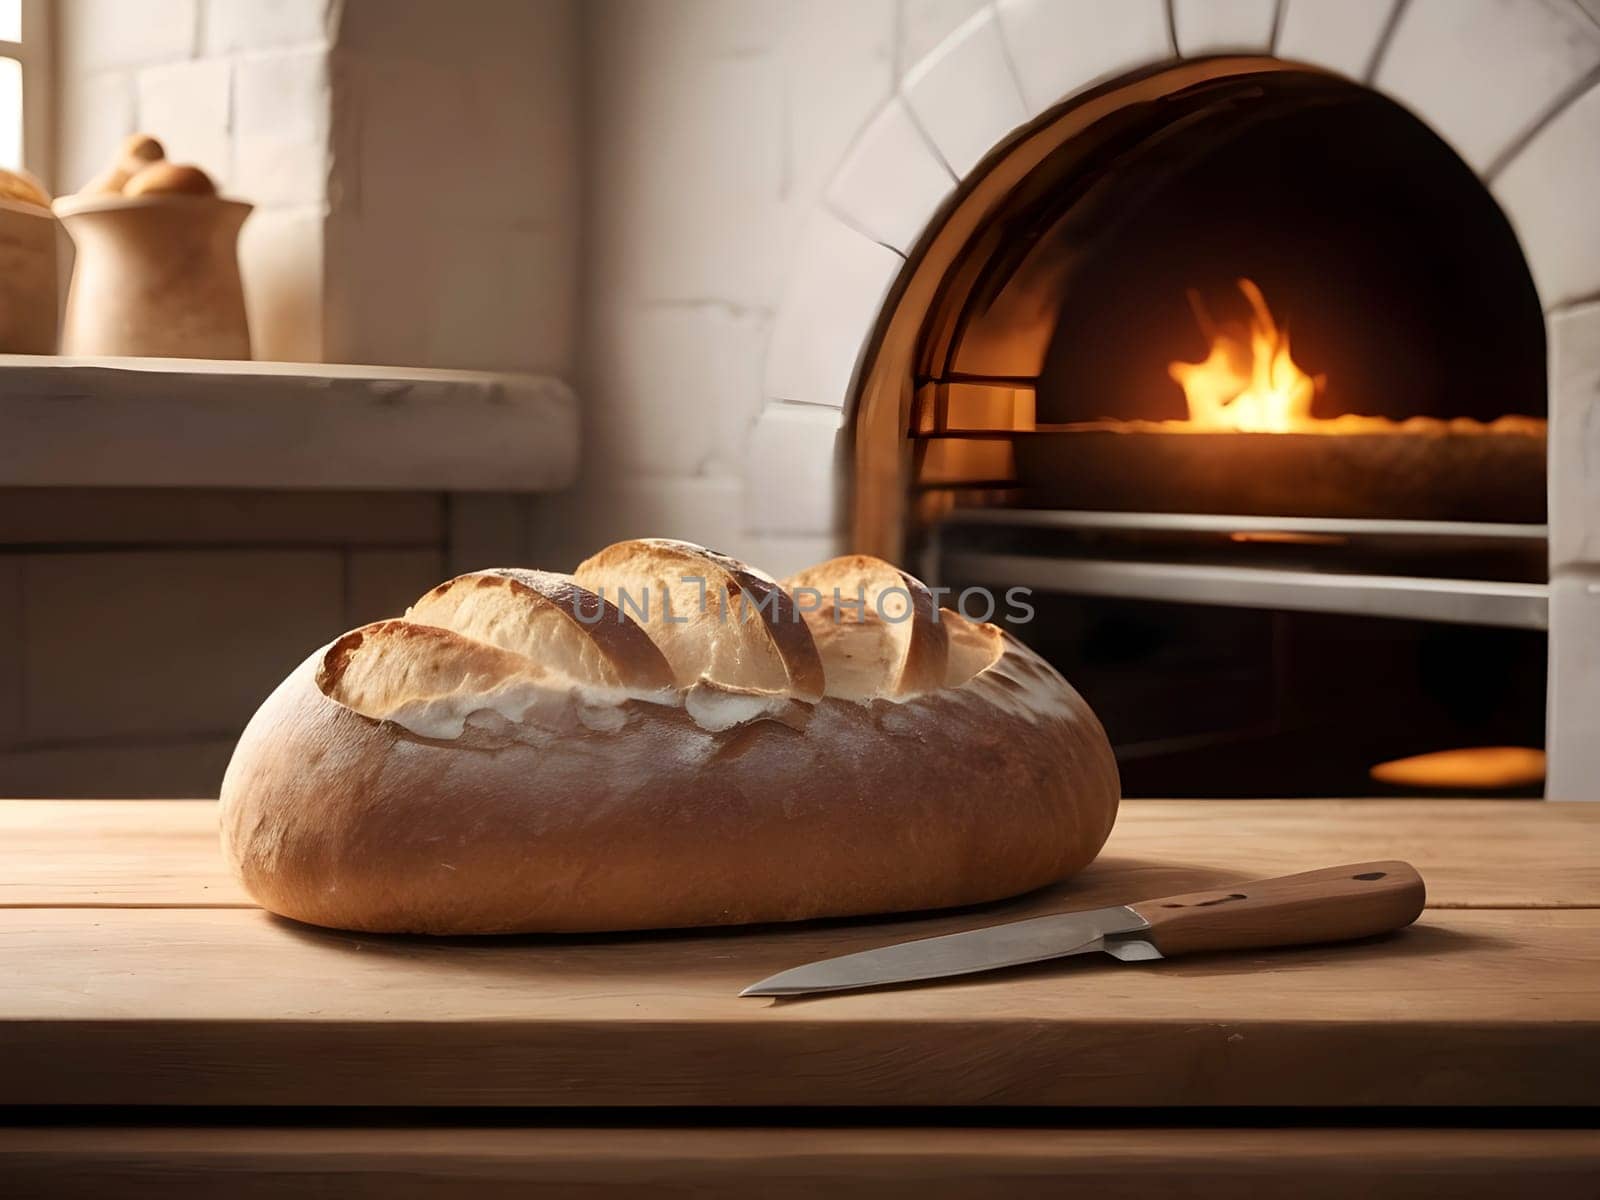 Oven-Fresh Delight. A Rustic Scene of Freshly Baked Bread on a Wooden Table.